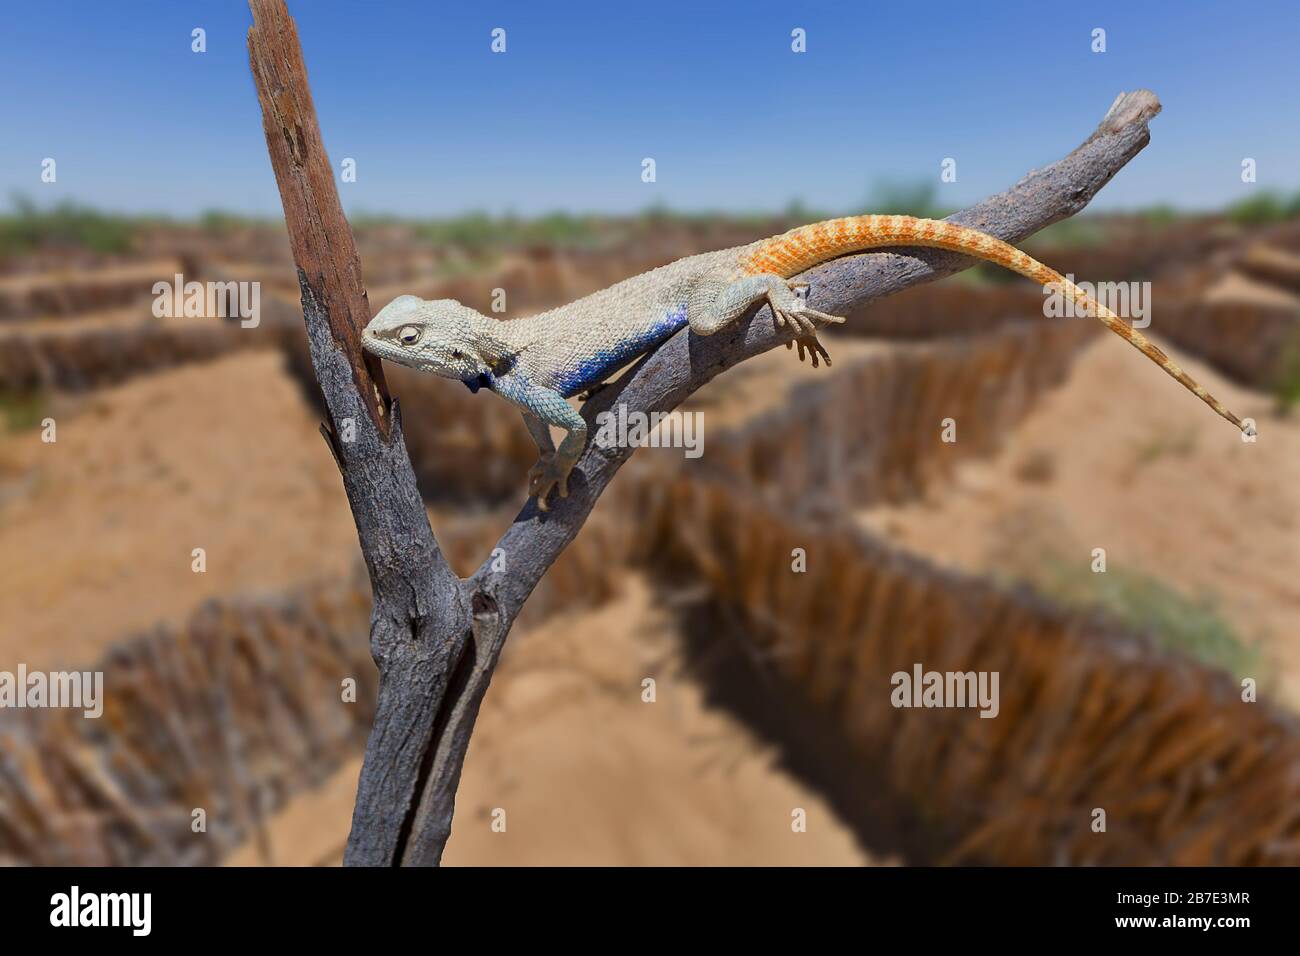 Lizard known as trapelus sanguinolentus, in the Kyzylkum desert in Uzbekistan, with reed structures to hold the sand, in the background Stock Photo